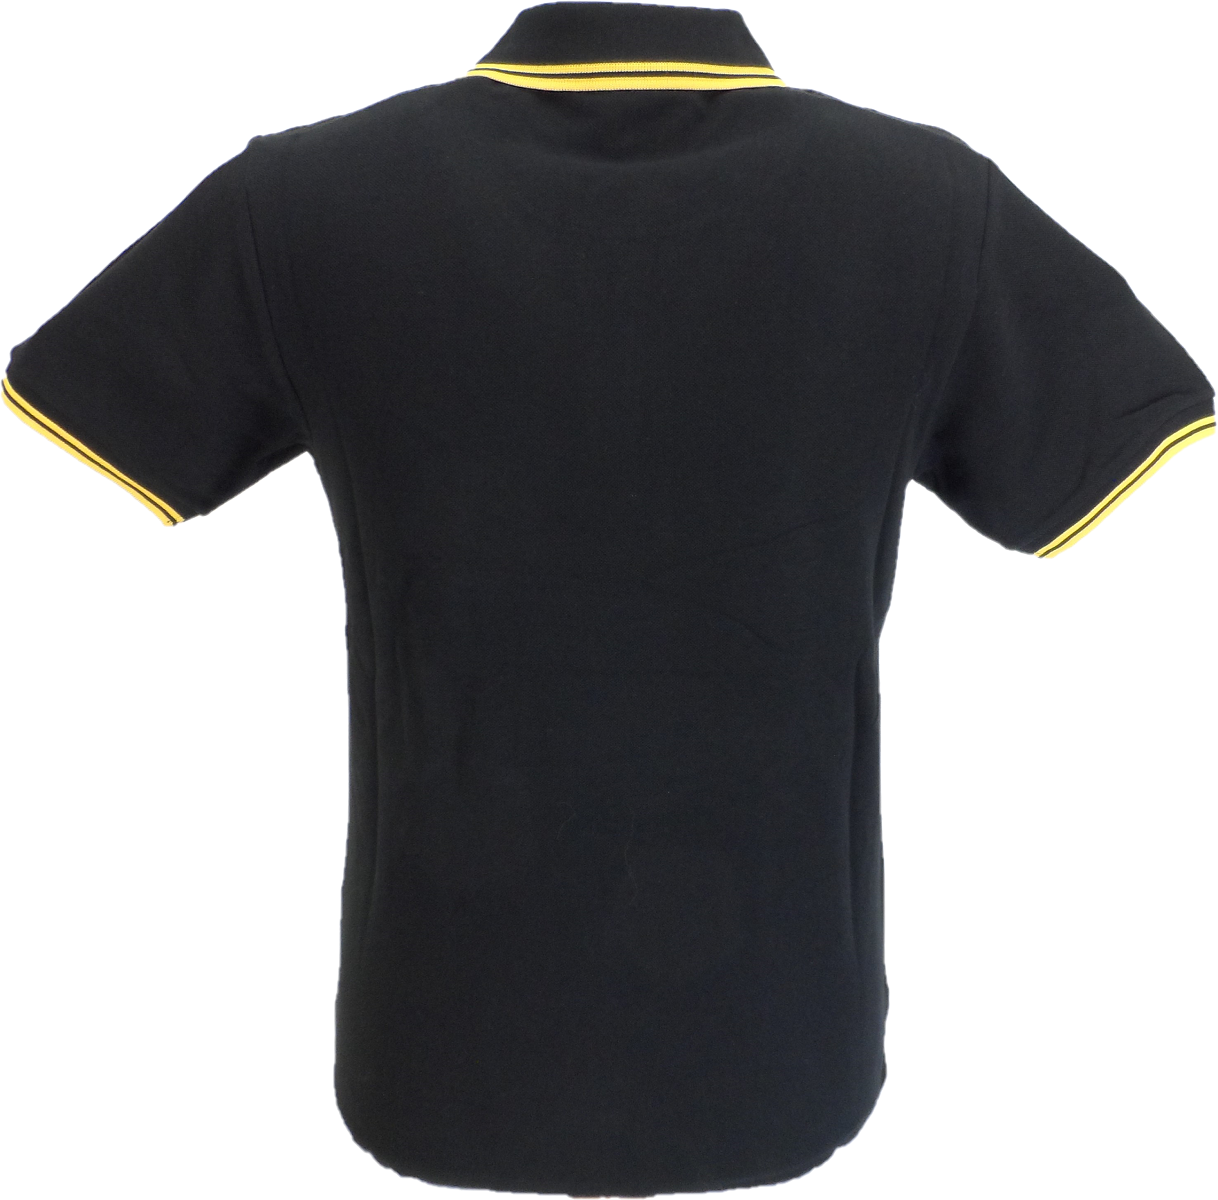 Trojan Records Mens Black with Mustard Twin Tipped Polo Shirt